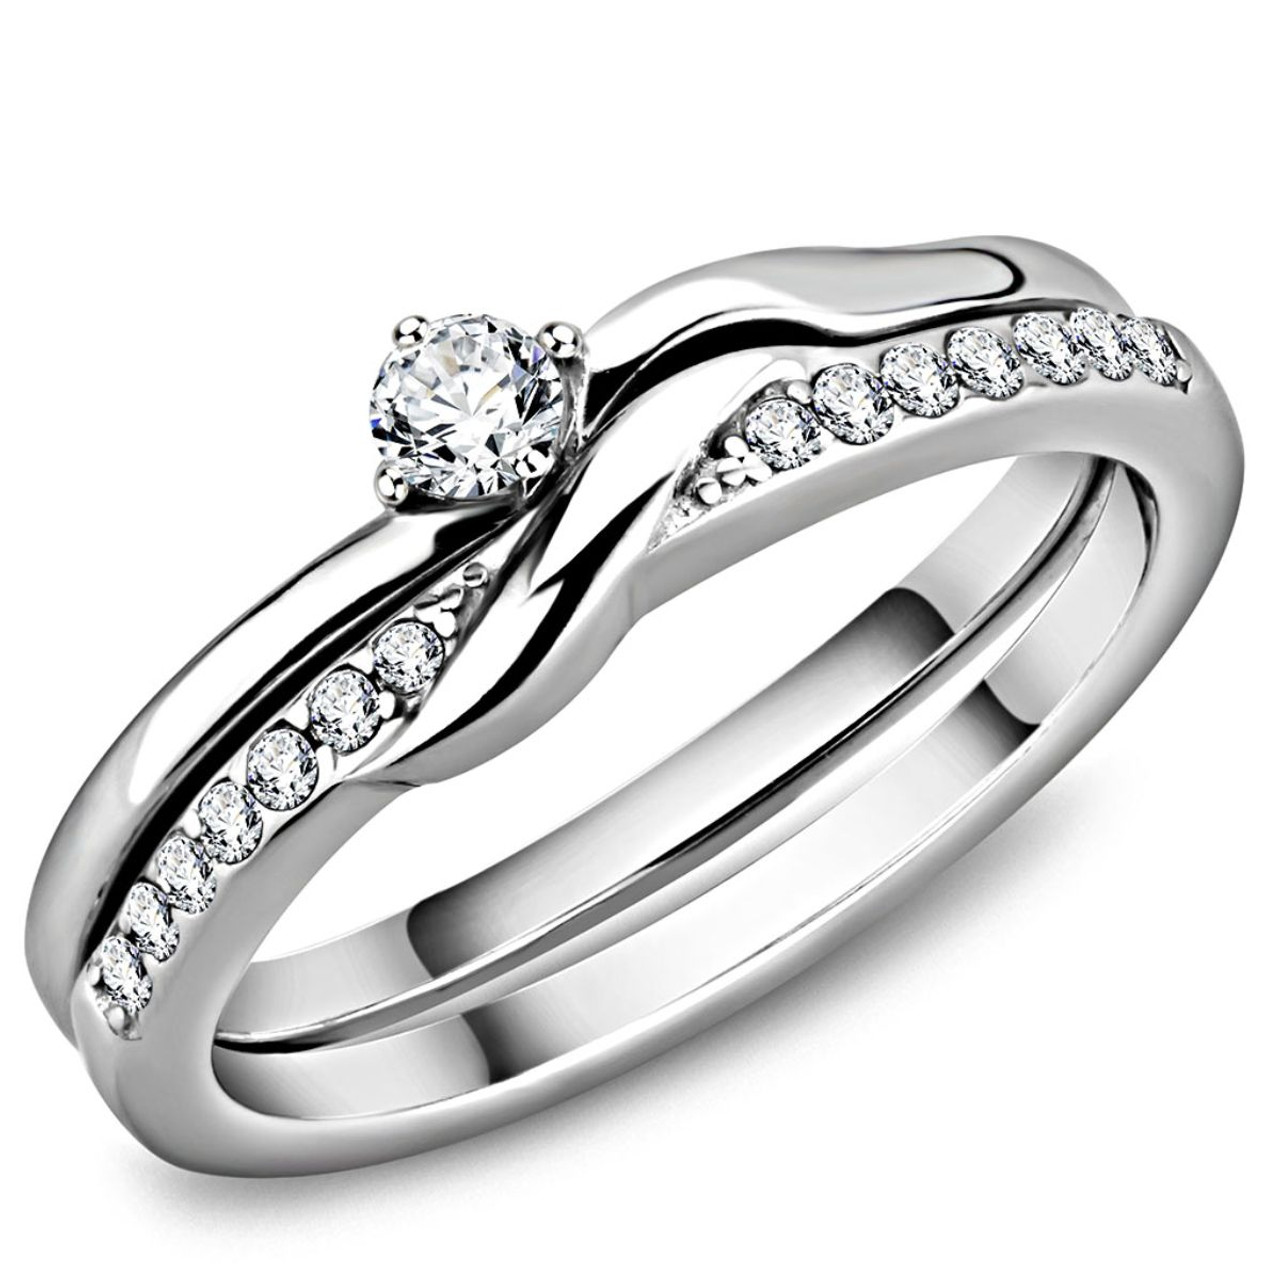 2-Piece Stainless Steel Women's Wedding Ring with Cubic Zirconia, Size 10  (Pack of 2)